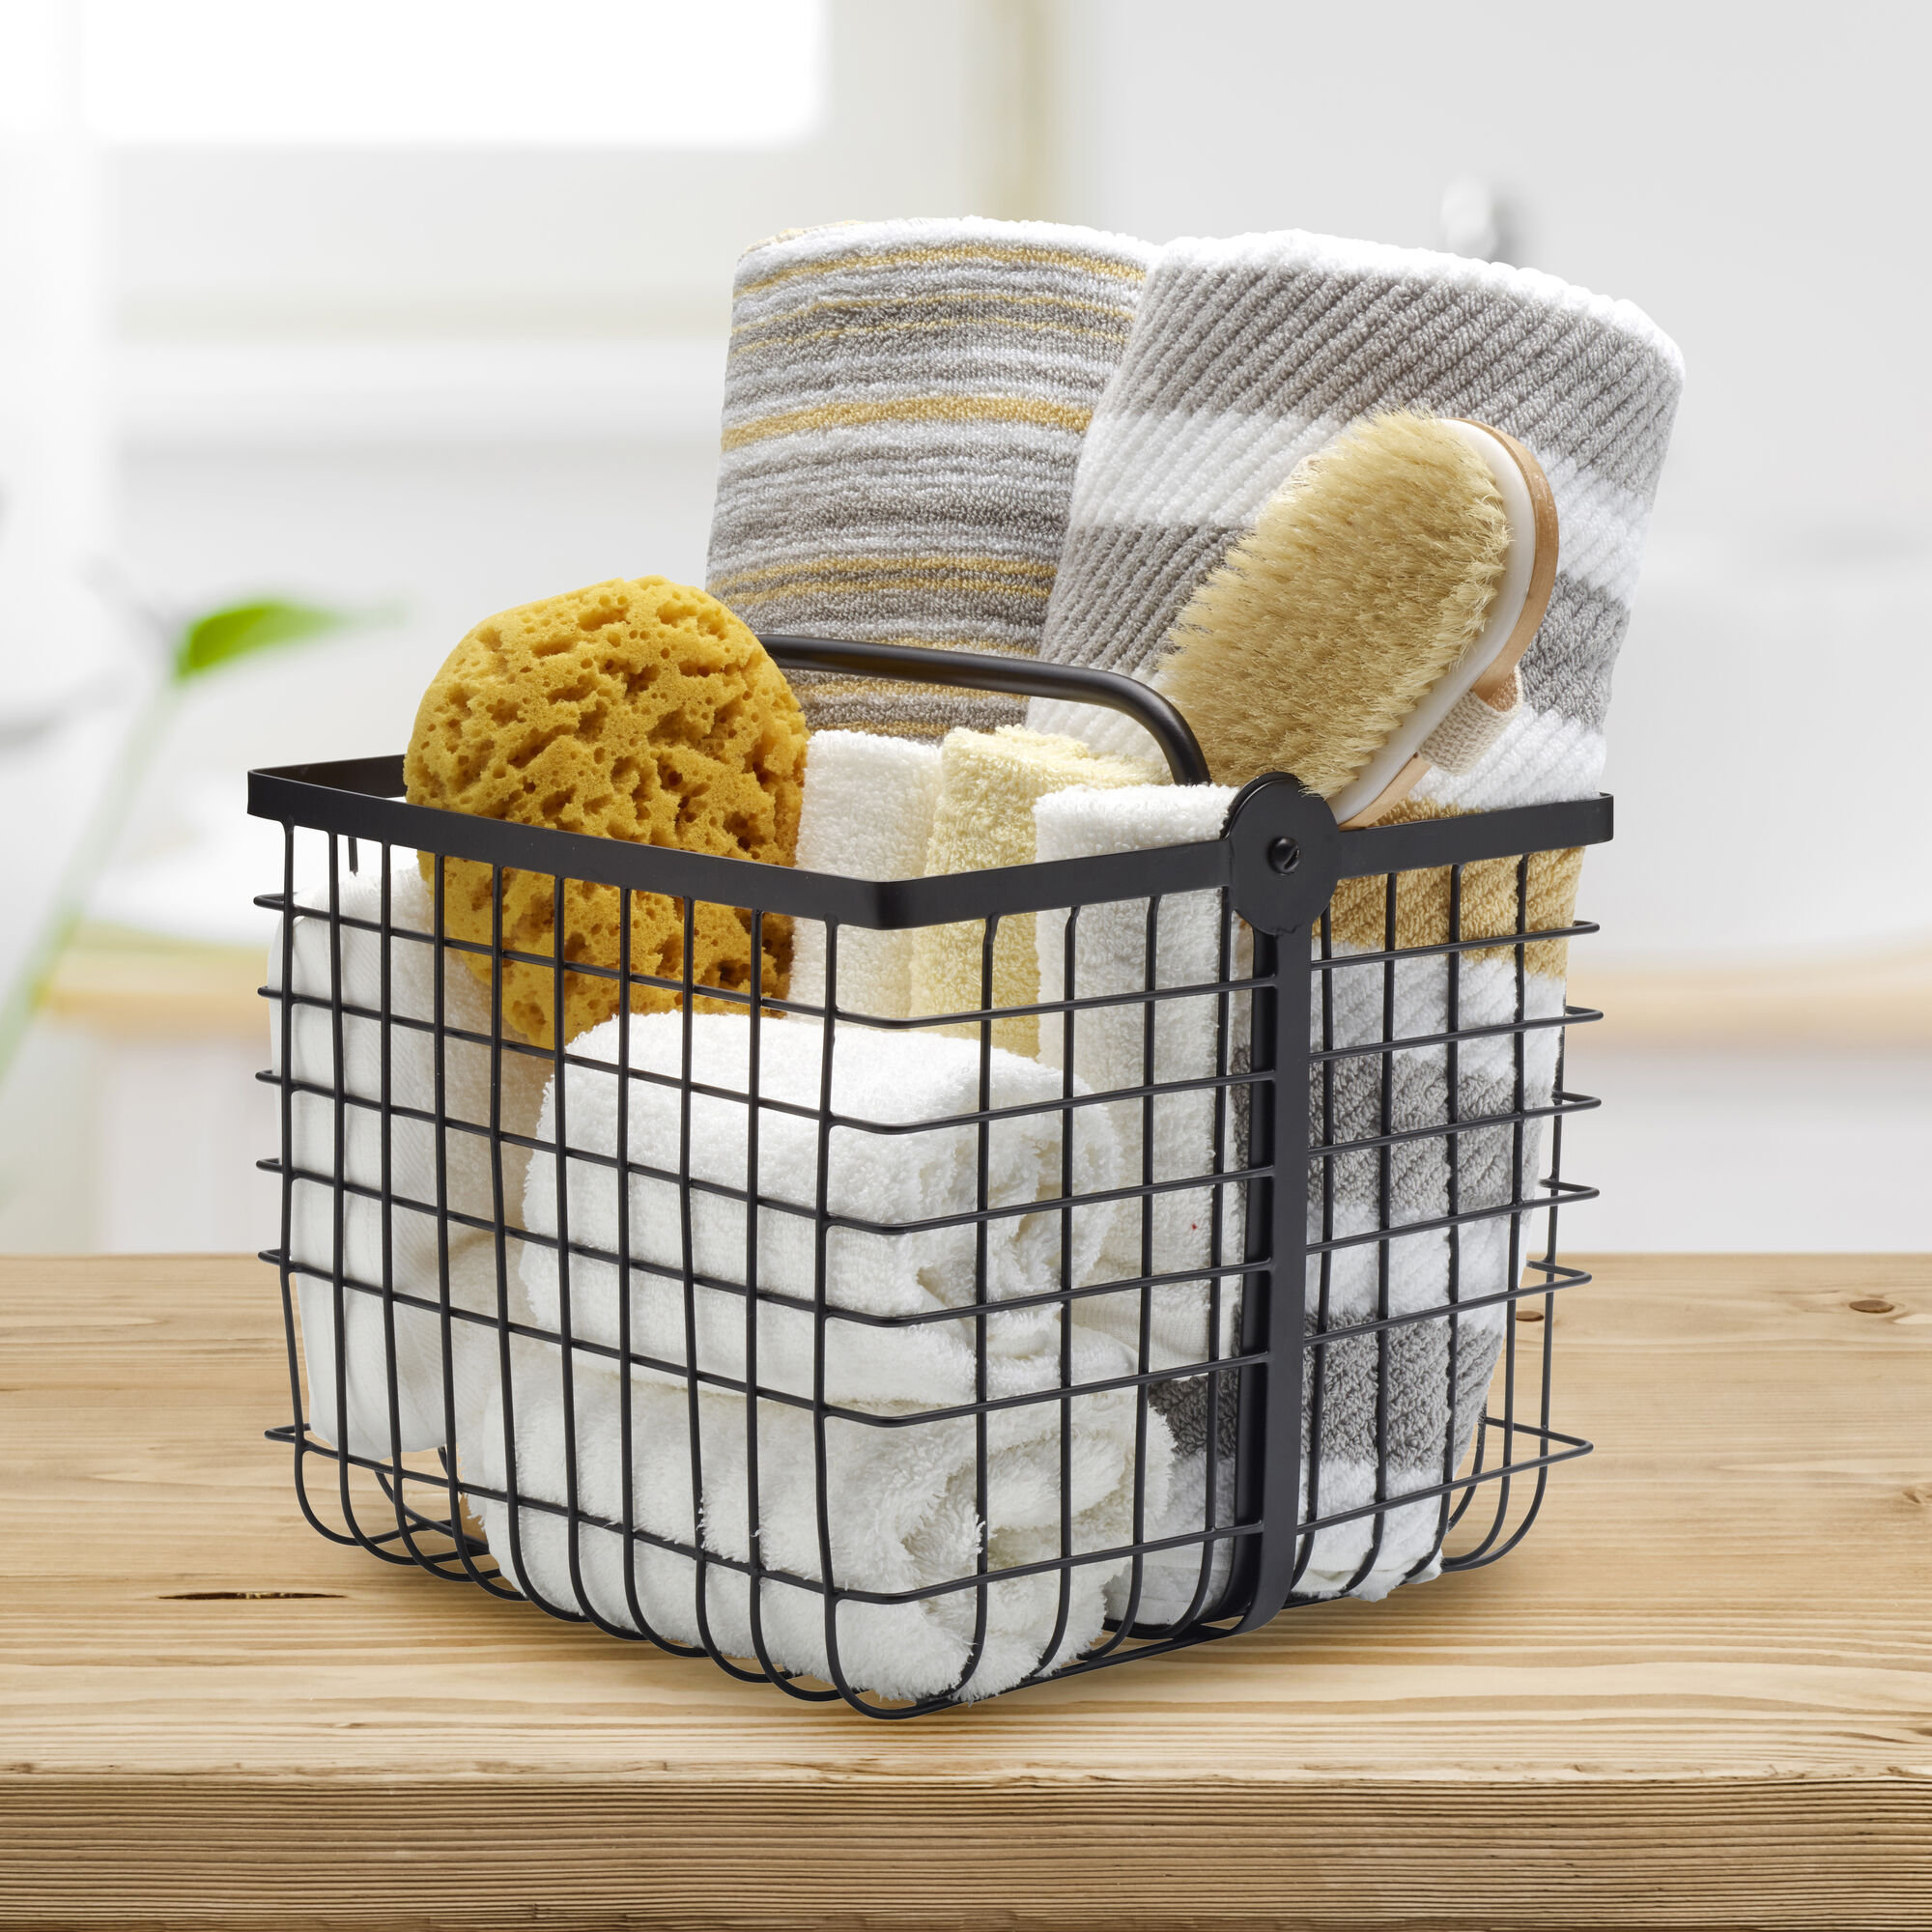 Home Basics 2 Tier Shower Caddy with Plastic Baskets, Black